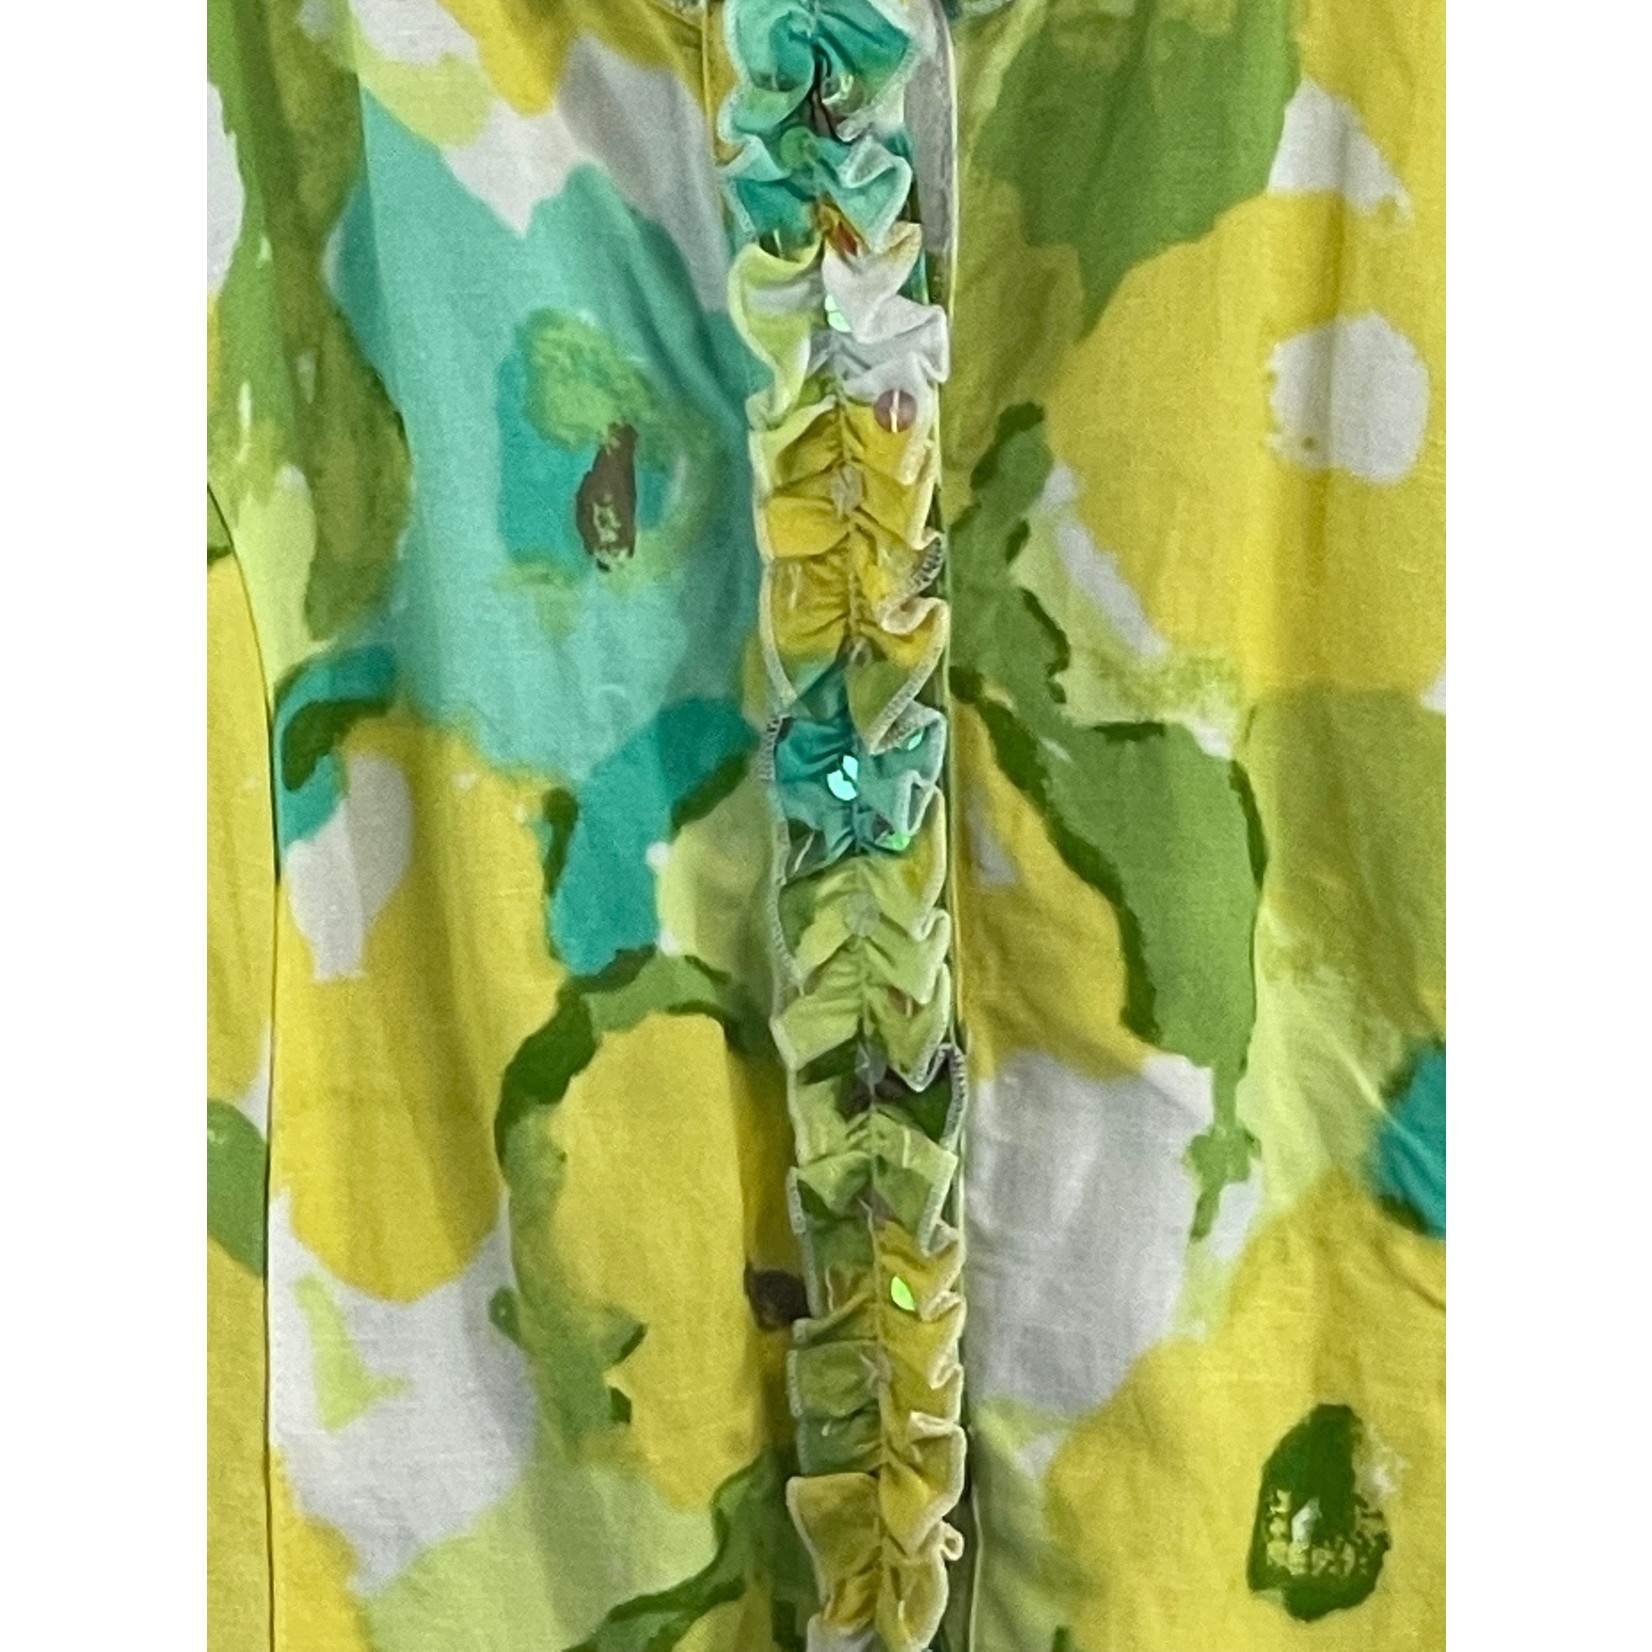 Ruby Rd. Ruby Rd, Yellow , Turquoise, Floral, Jacket, Size 8